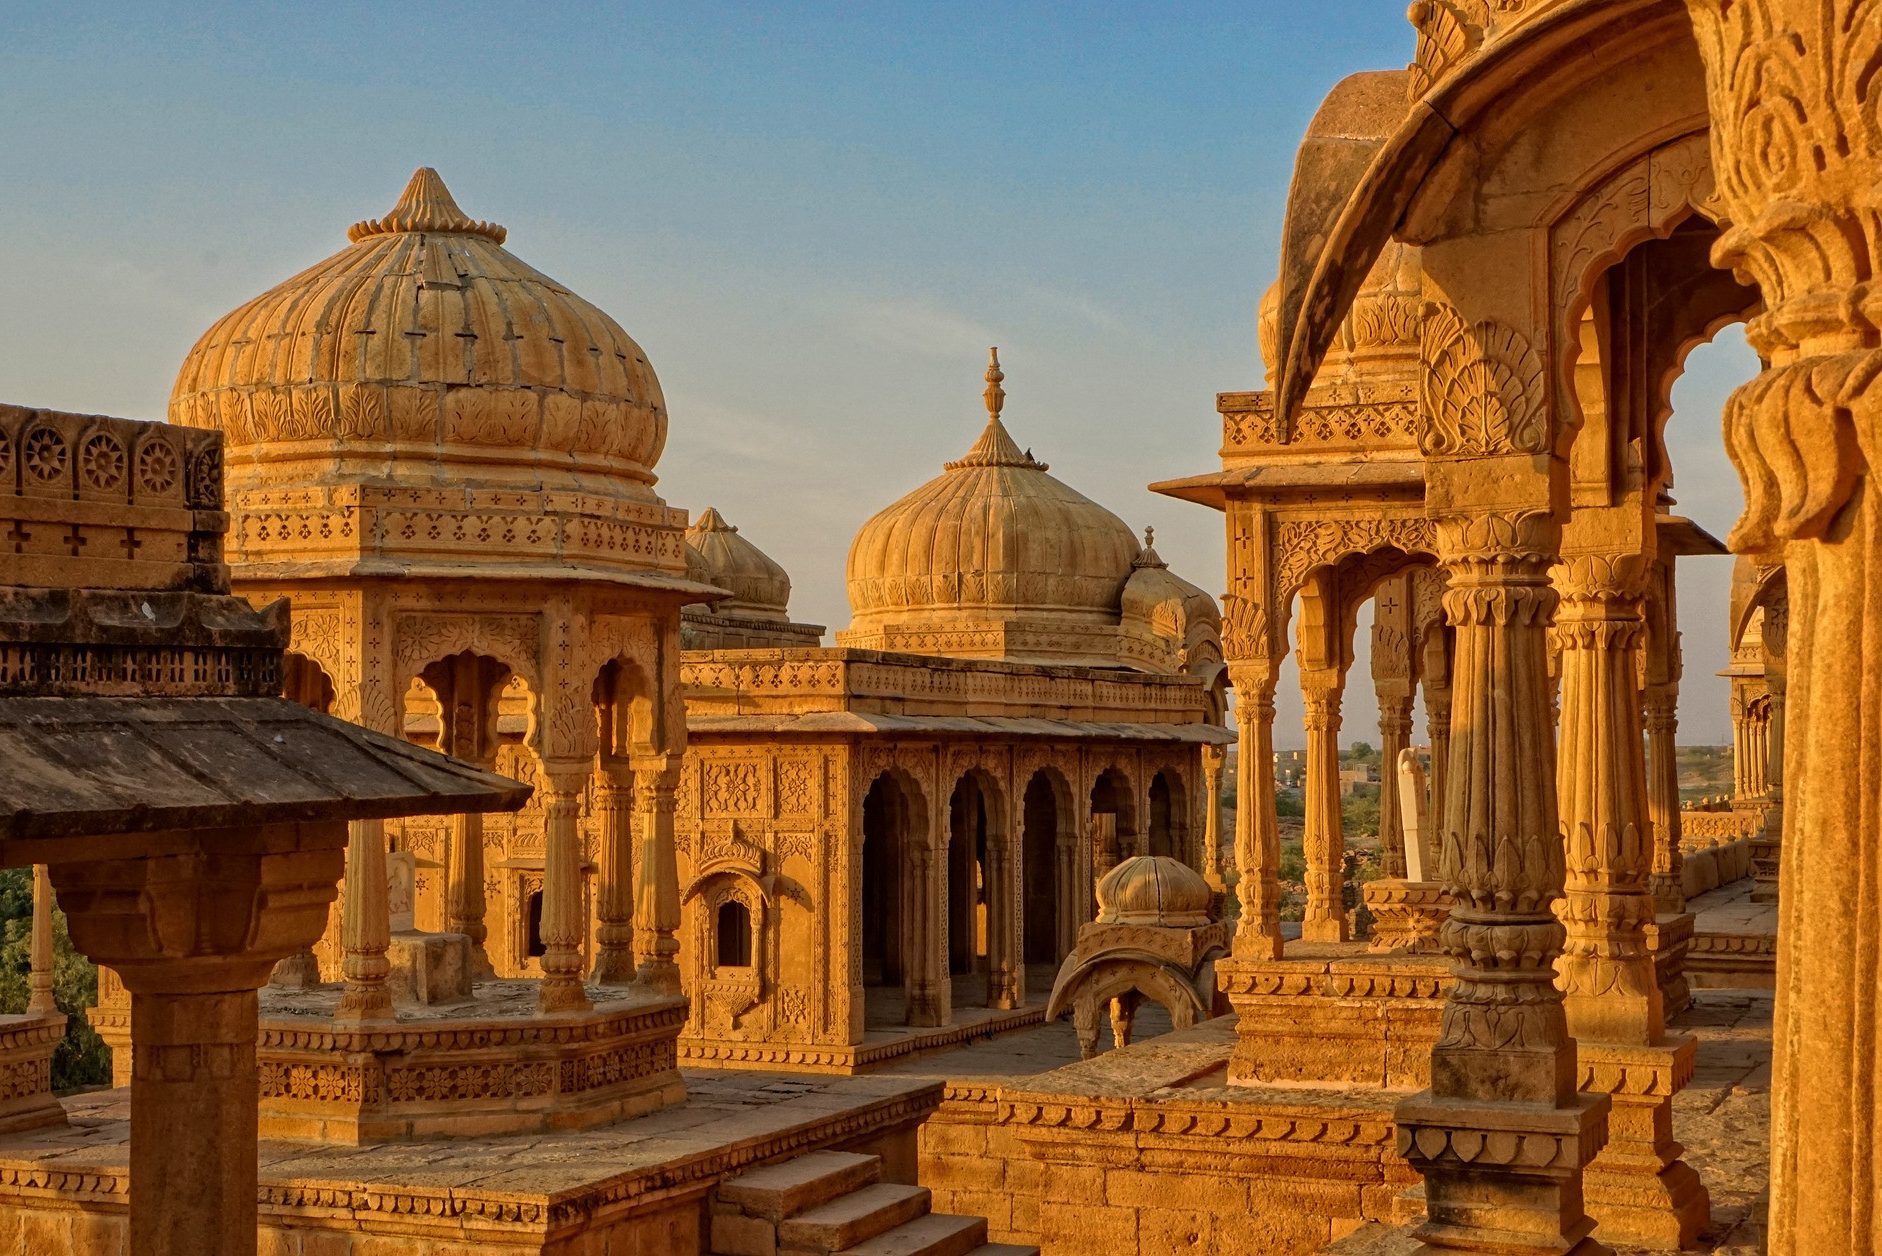 What to see in Rajasthan